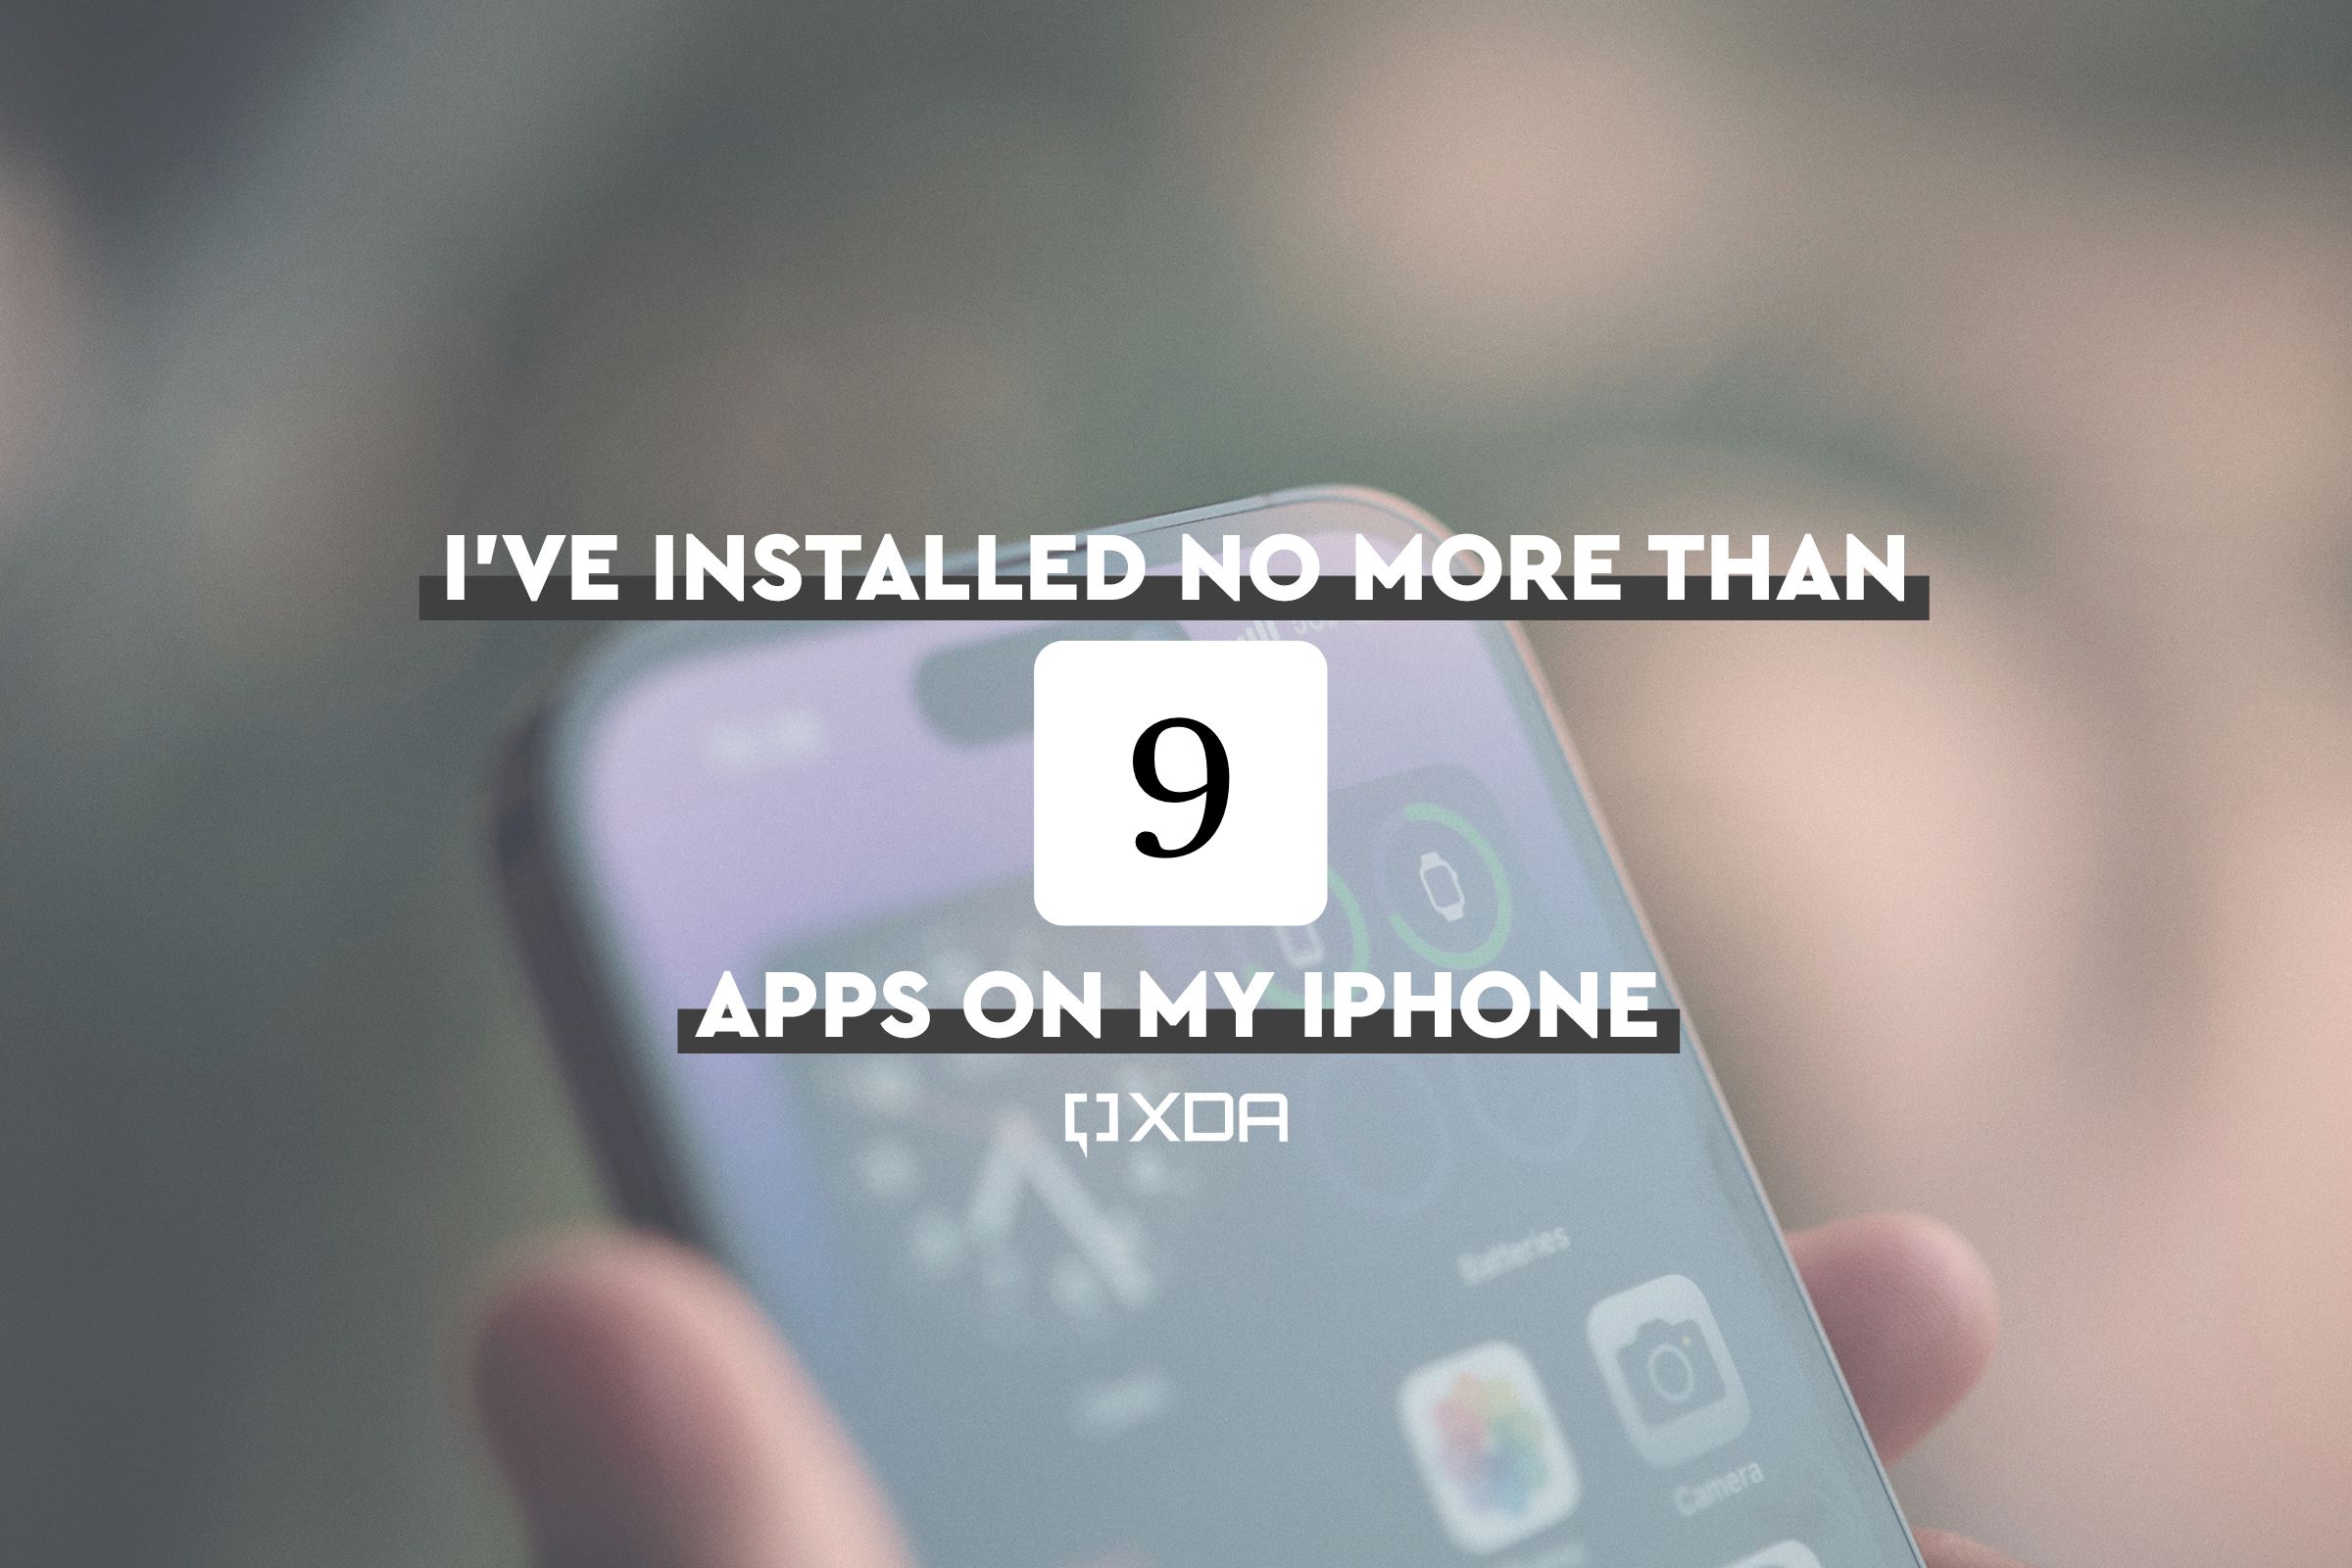 I've installed no more than 9 apps on my iPhone